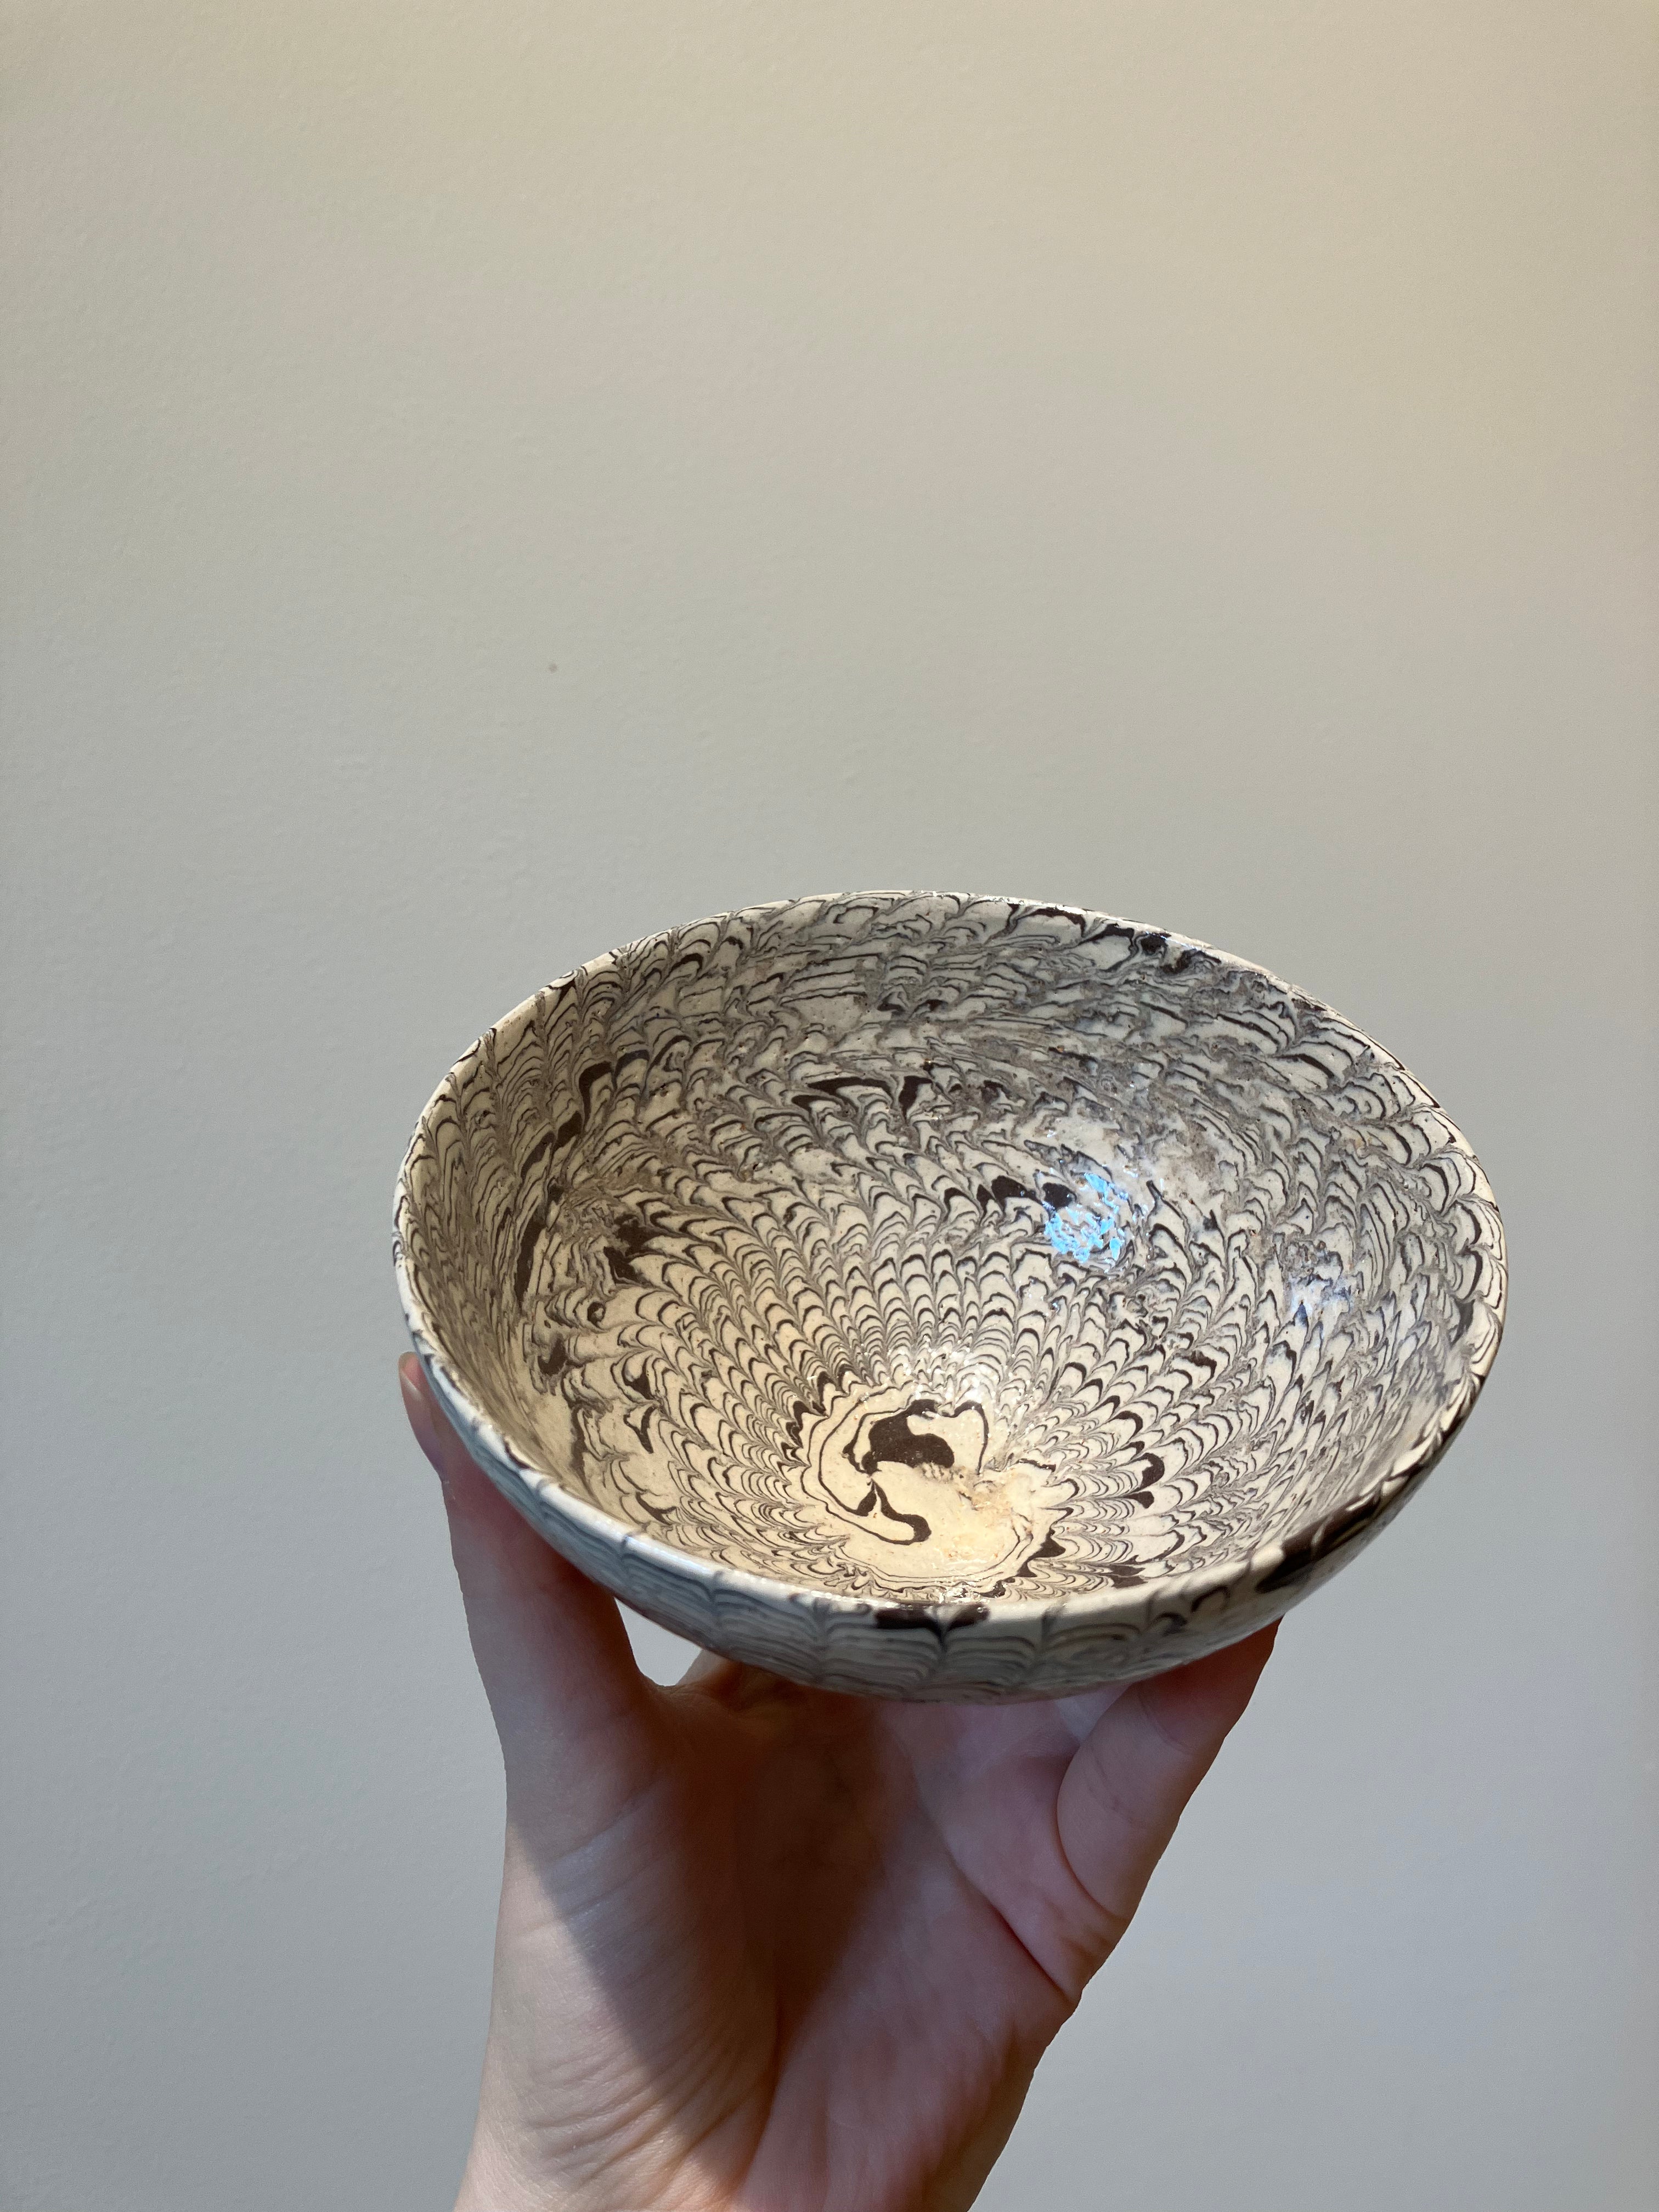 Handmade bowl in brown and beige clay